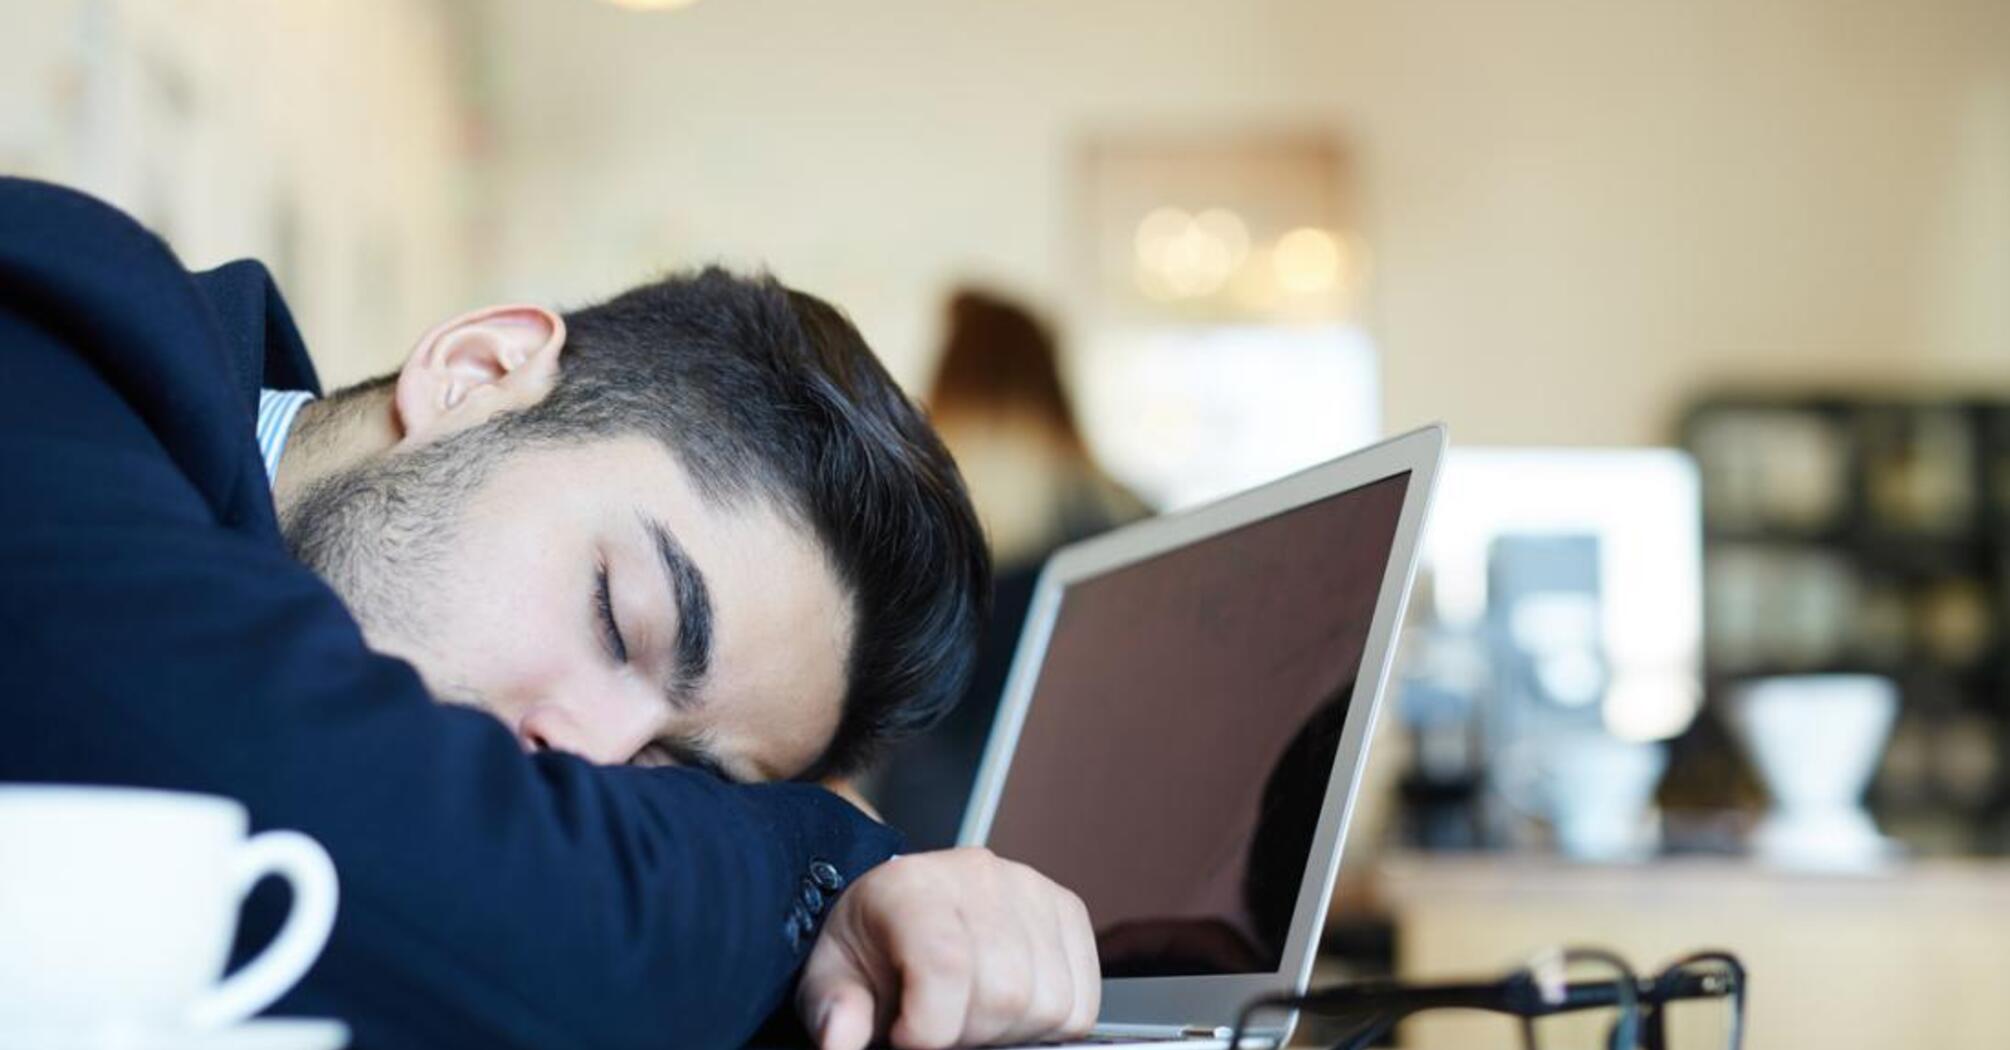 How to avoid morning fatigue to stay alert all day